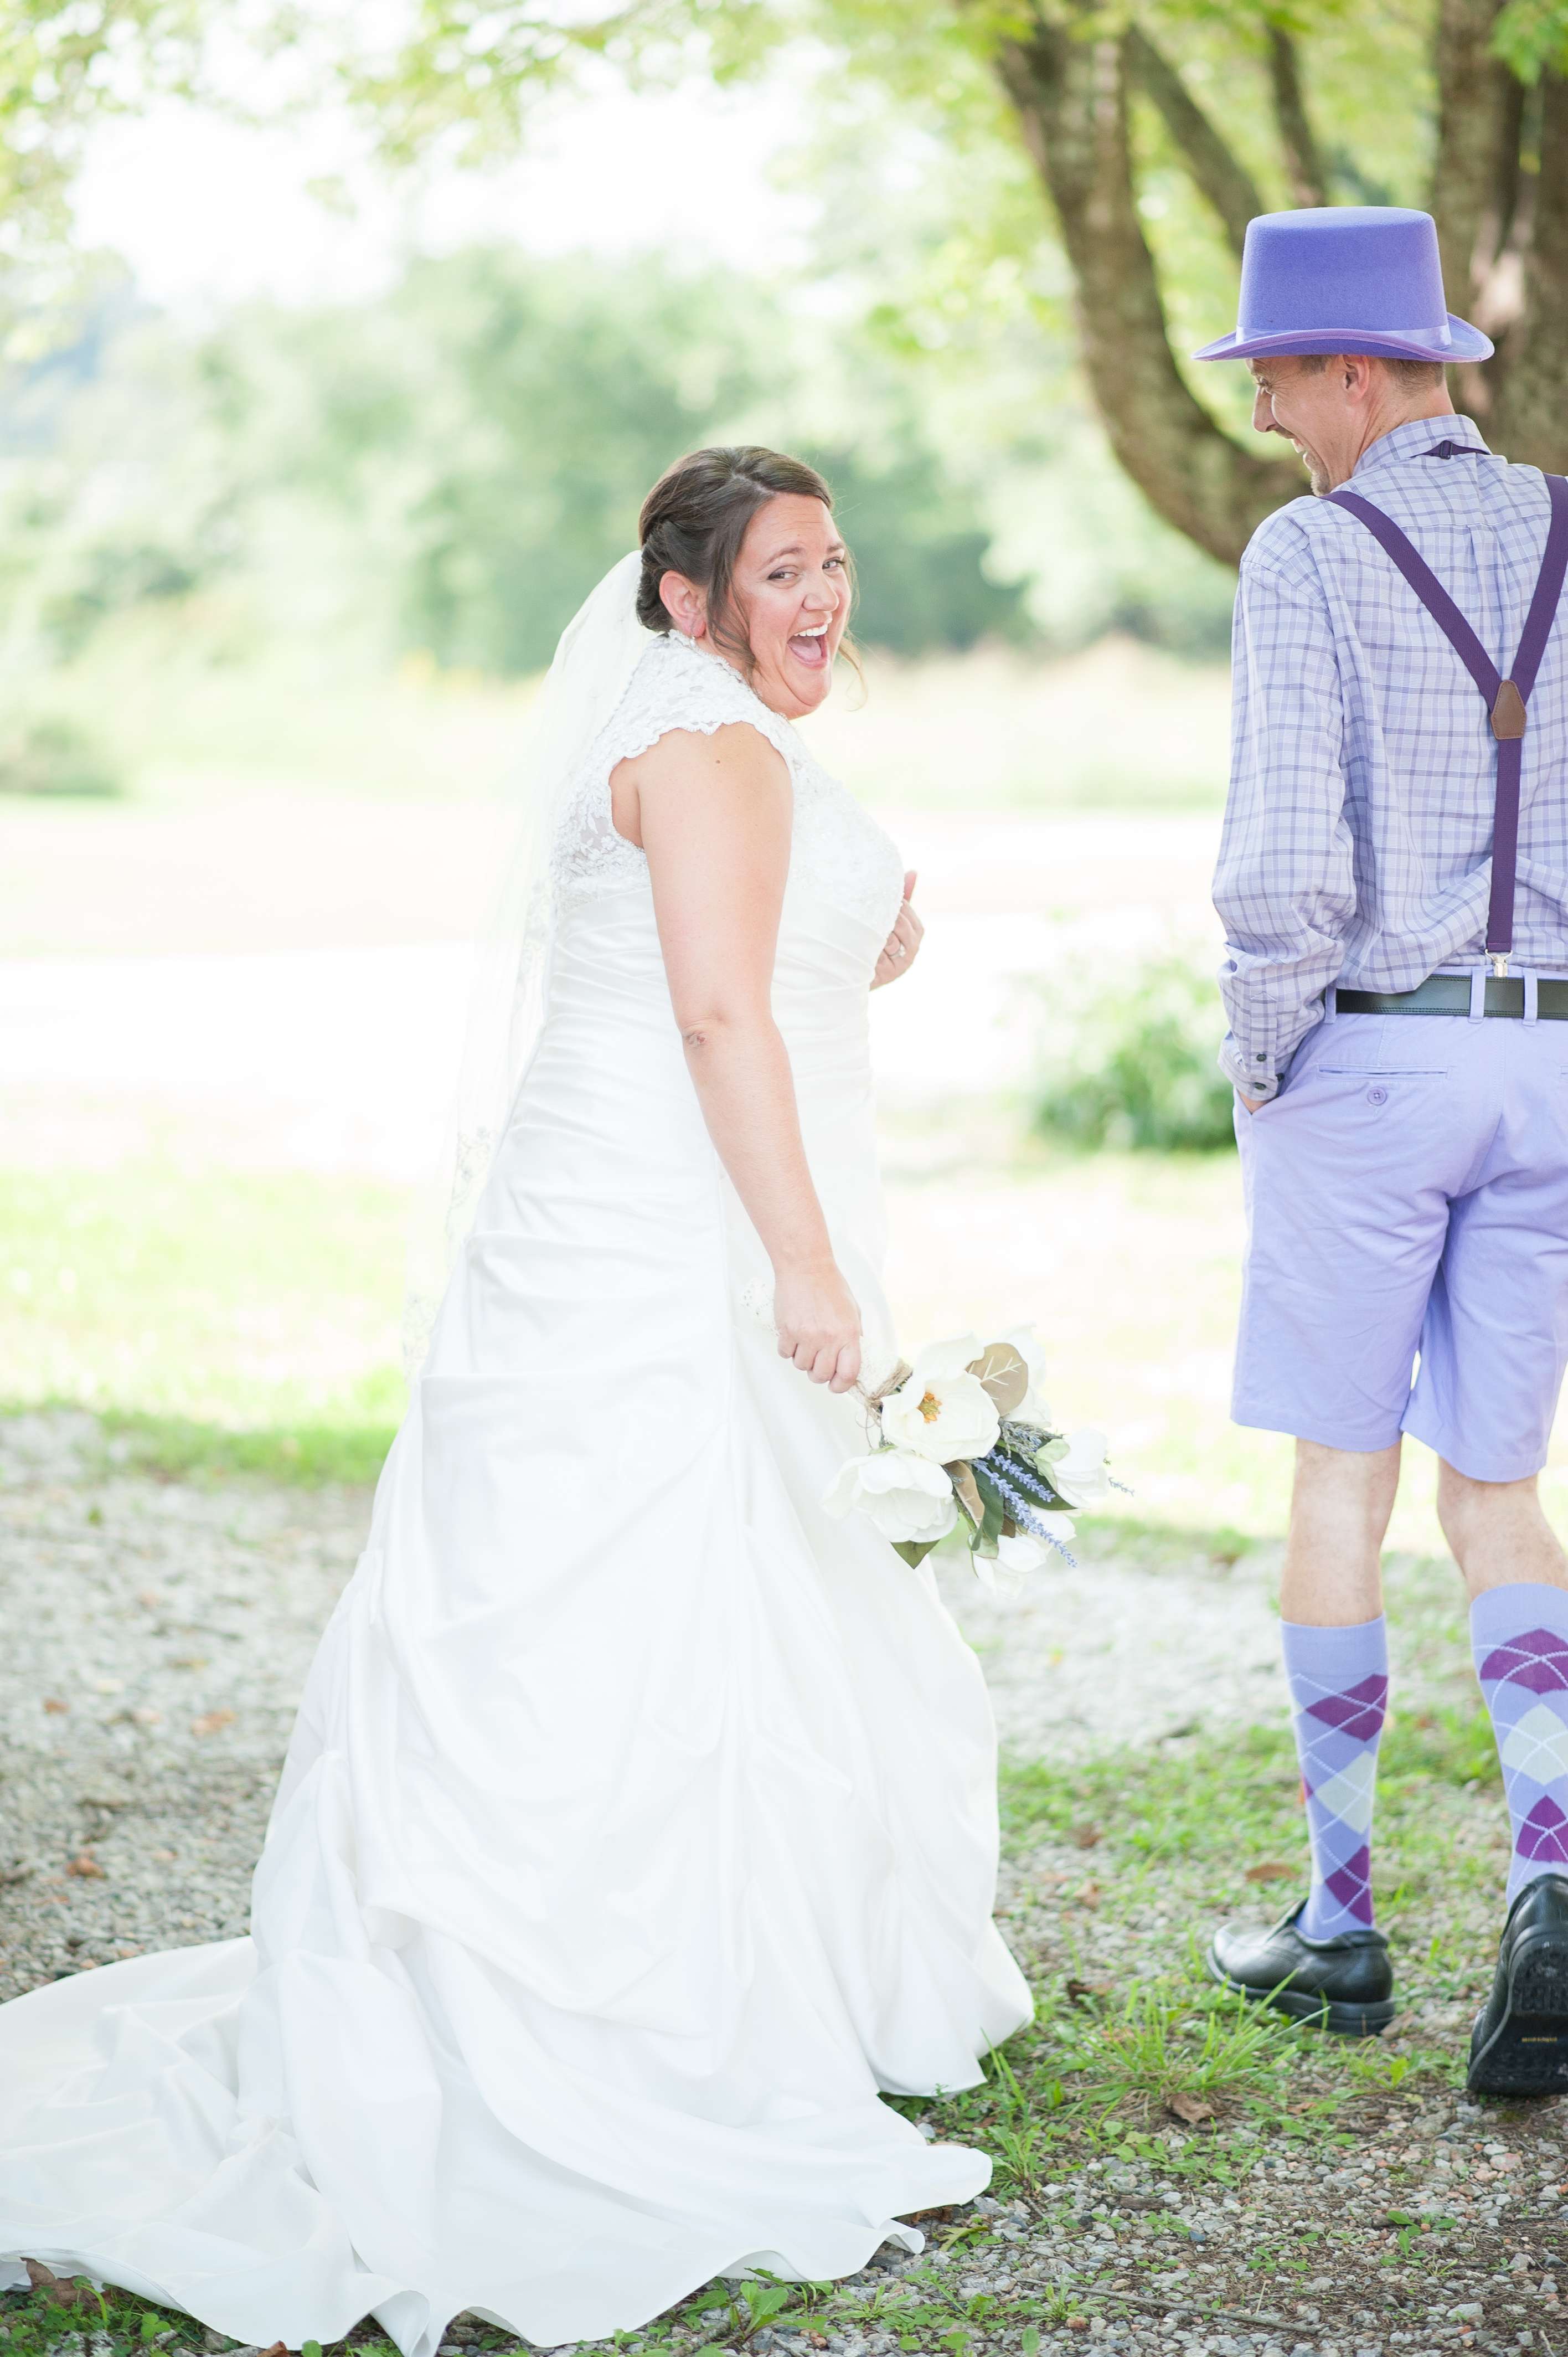 Bride laughing and being surprised by her ushers on her wedding day.